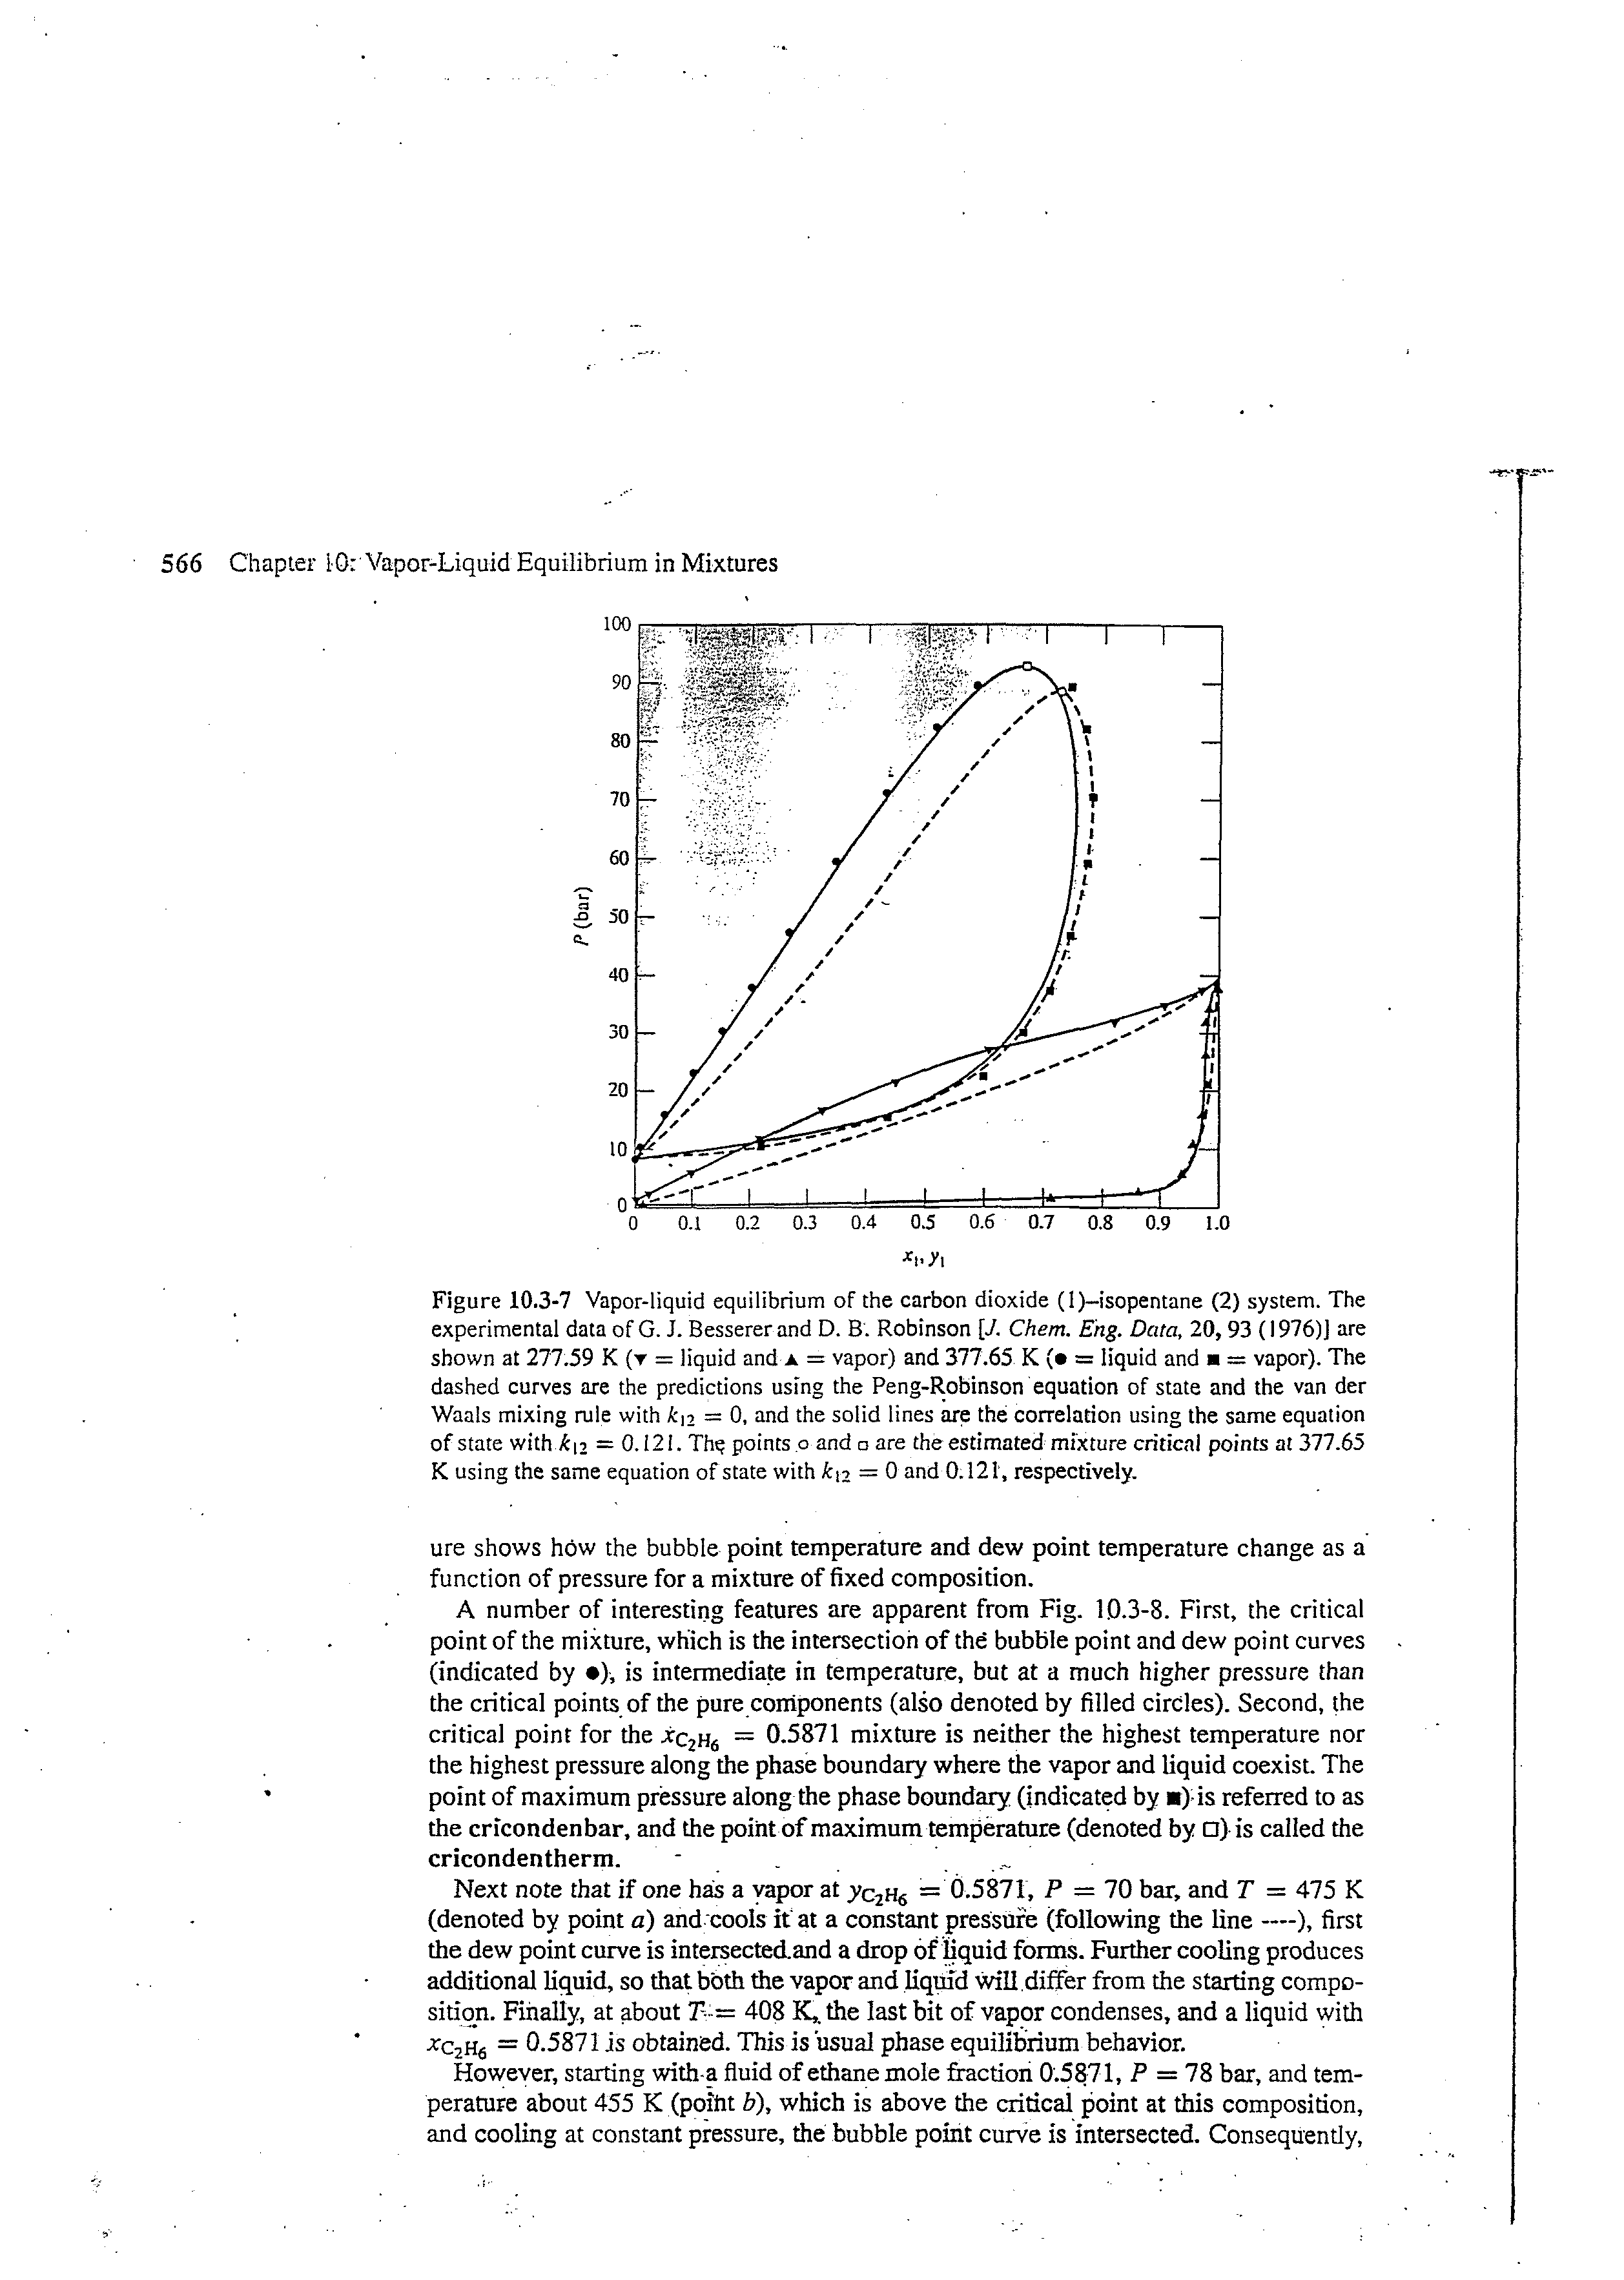 Figure 10.3-7 Vapor-liquid equilibrium of the carbon dioxide (l)-isopentane (2) system. The experimental data of G. J. Besserer and D. B. Robinson [J. Chem. Eng. Data. 20, 93 (1976)] are shown at 271.59 K (r = liquid and a = vapor) and 377.65 K ( = liquid and = vapor). The dashed curves are the predictions using the Peng-Robinson equation of state and the van der Waals mixing rule with kn = 0, and the solid lines are the correlation using the same equation of state with ij = 0.121. Thq points o and are the estimated mixture critical points at 377.65 K using the same equation of state with k 2 = 0 and 0.121, respectively.